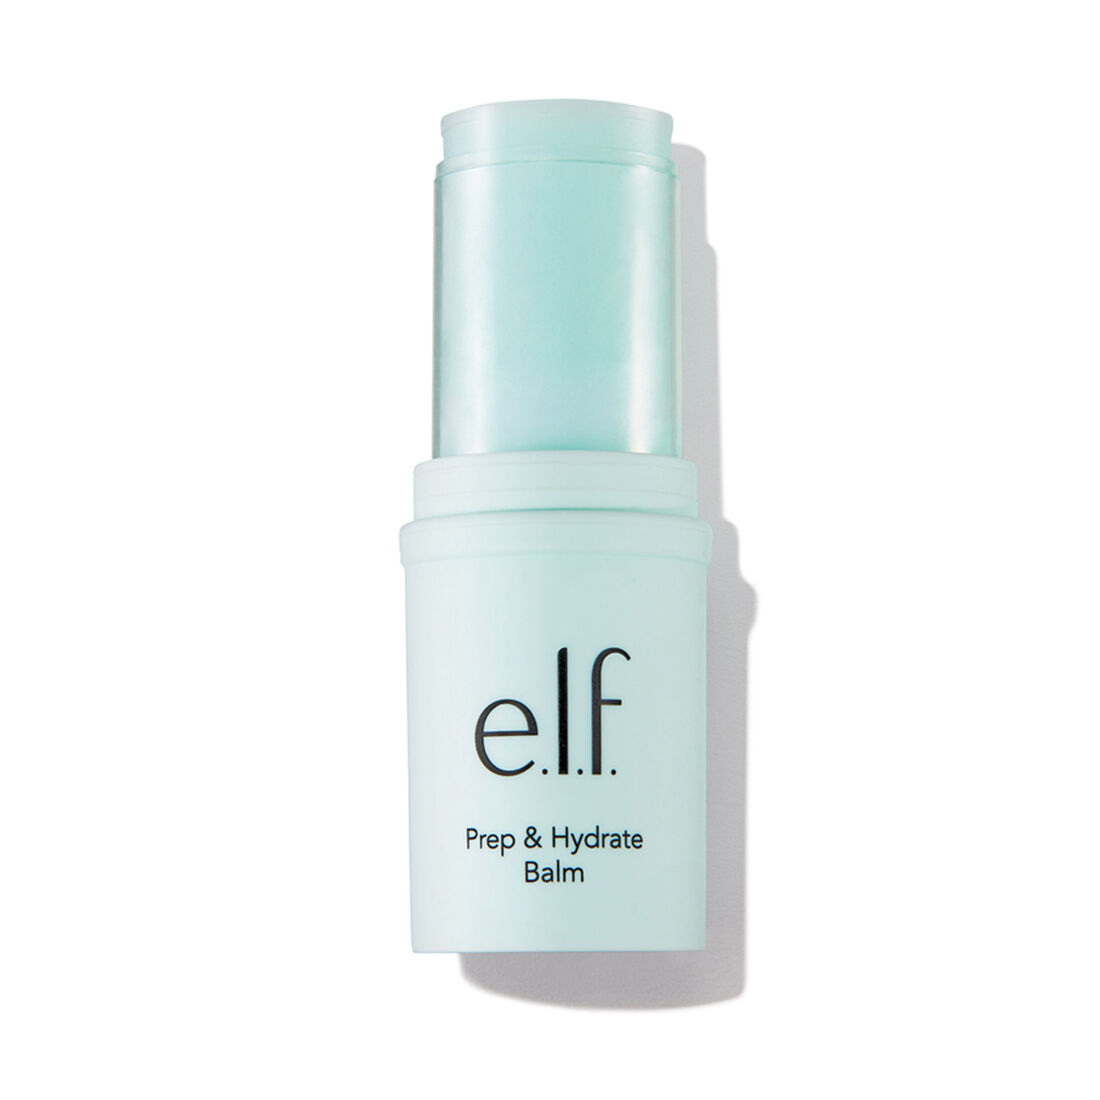 e.l.f. Cosmetics Prep and Hydrate Balm, best water-based primers